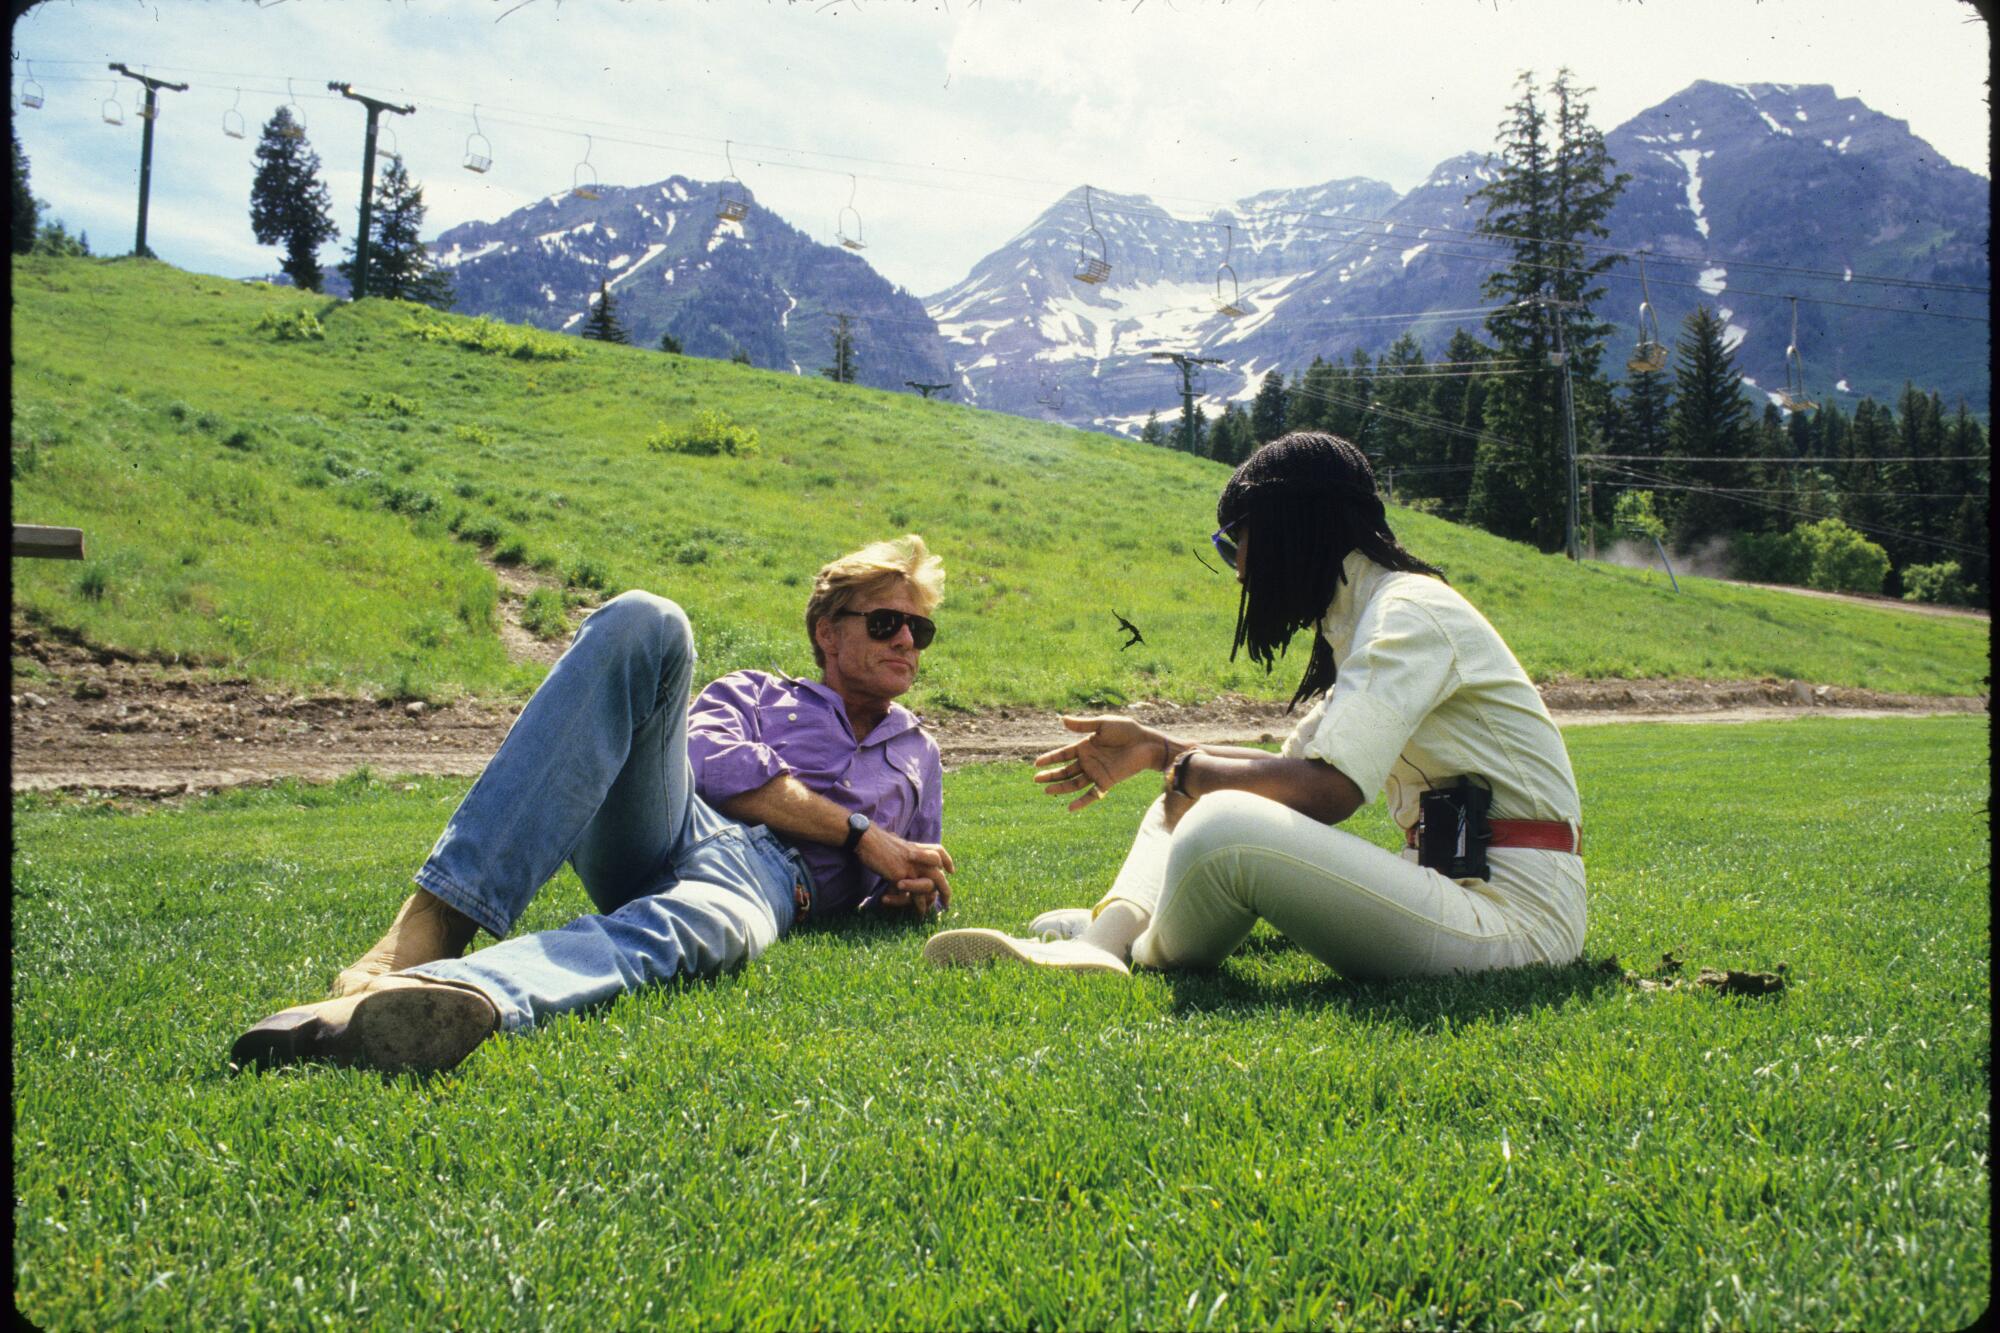 A man, left, and a woman chat in the grass with mountains in the background